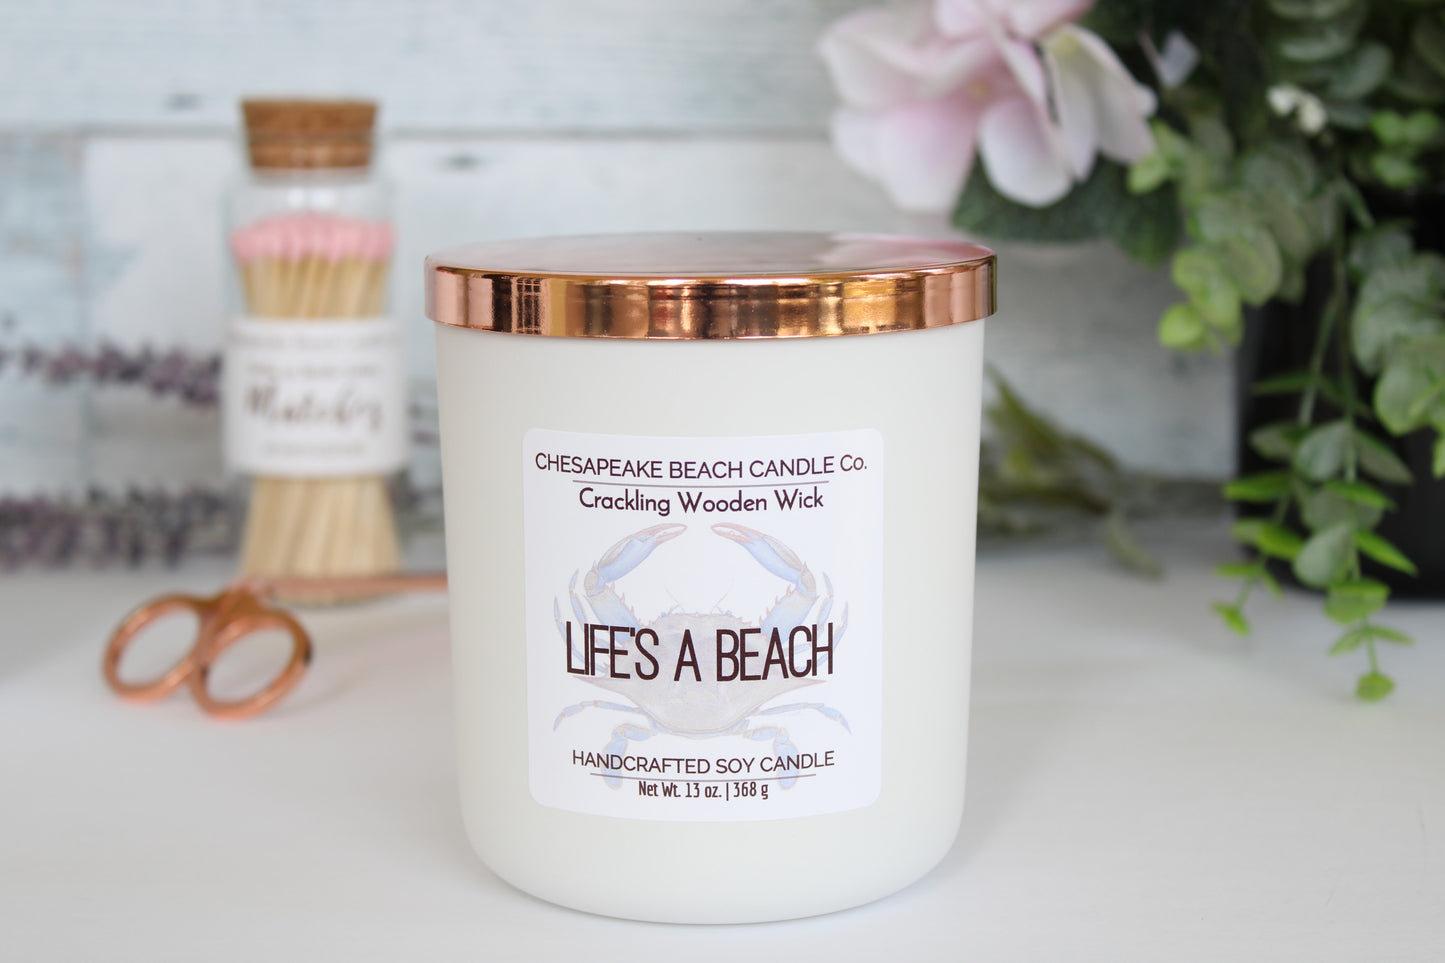 Life's a Beach Wooden Wick Candle (13 oz)